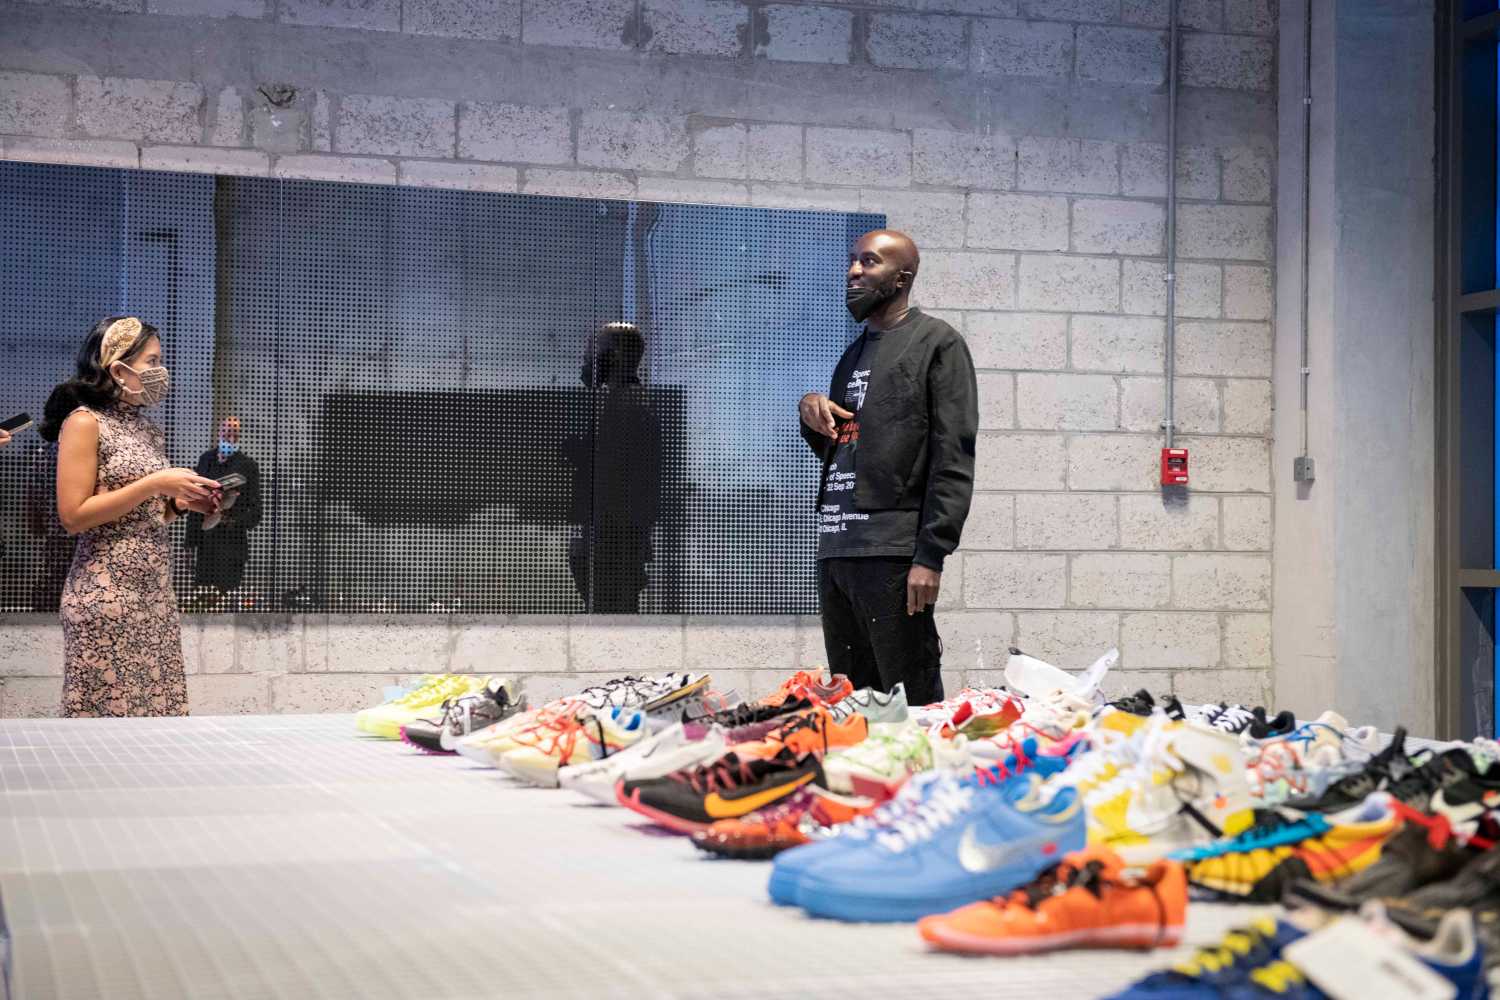 Virgil Abloh continues his massive Figures of Speech show at Boston's ICA